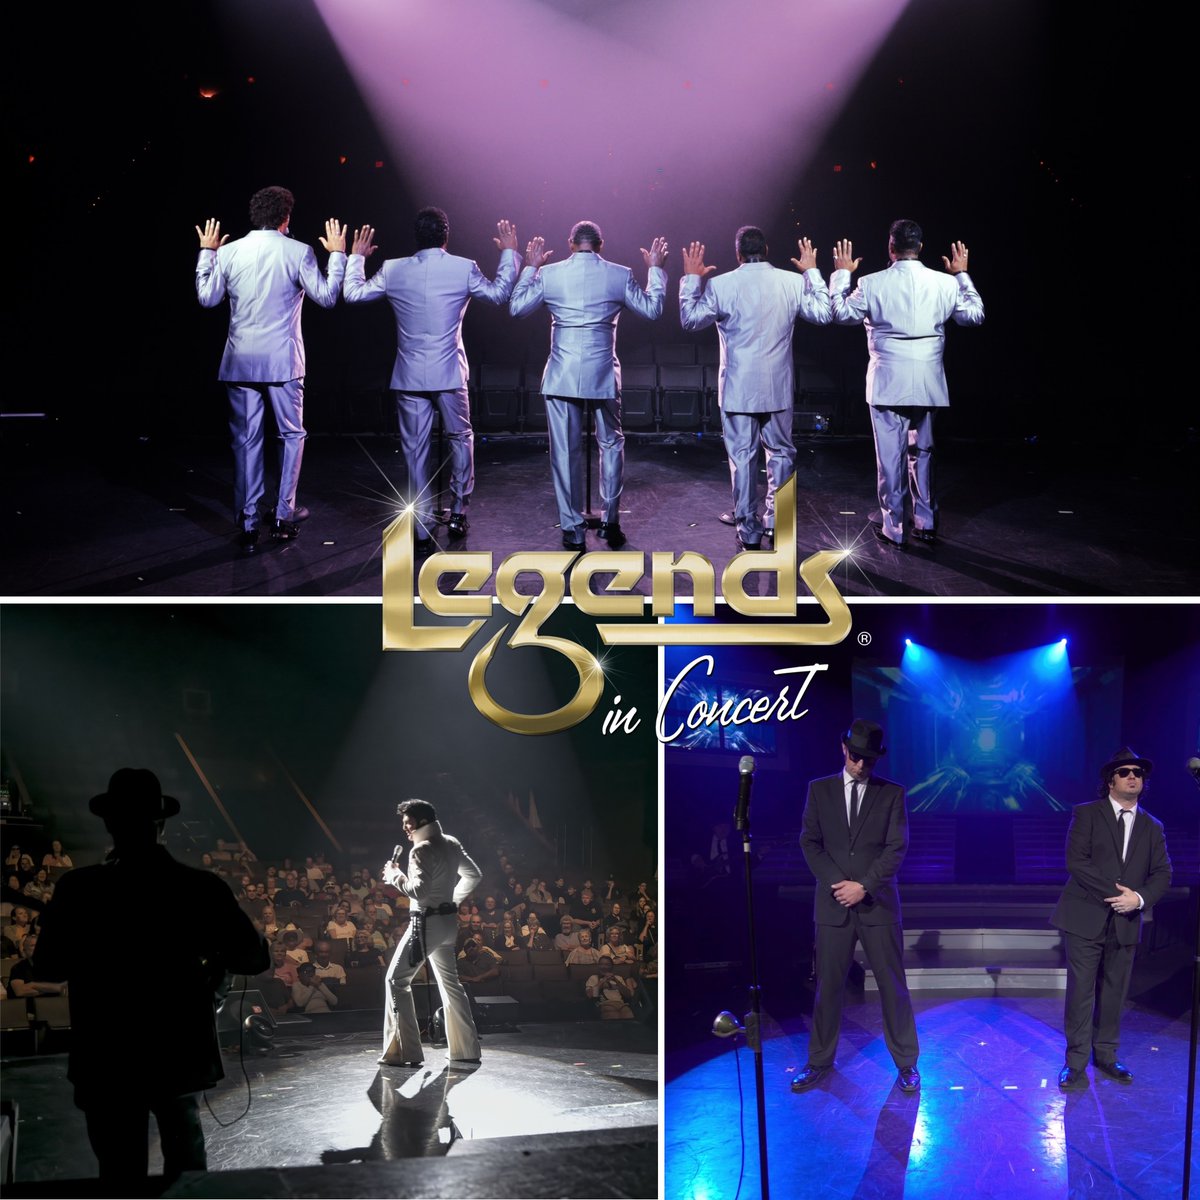 Show time is 8pm TONIGHT featuring tributes to The Temptations, Elvis, and The Blues Brothers™! #legendsinconcert #bransonmo #bransonmissouri @LegendsConcert